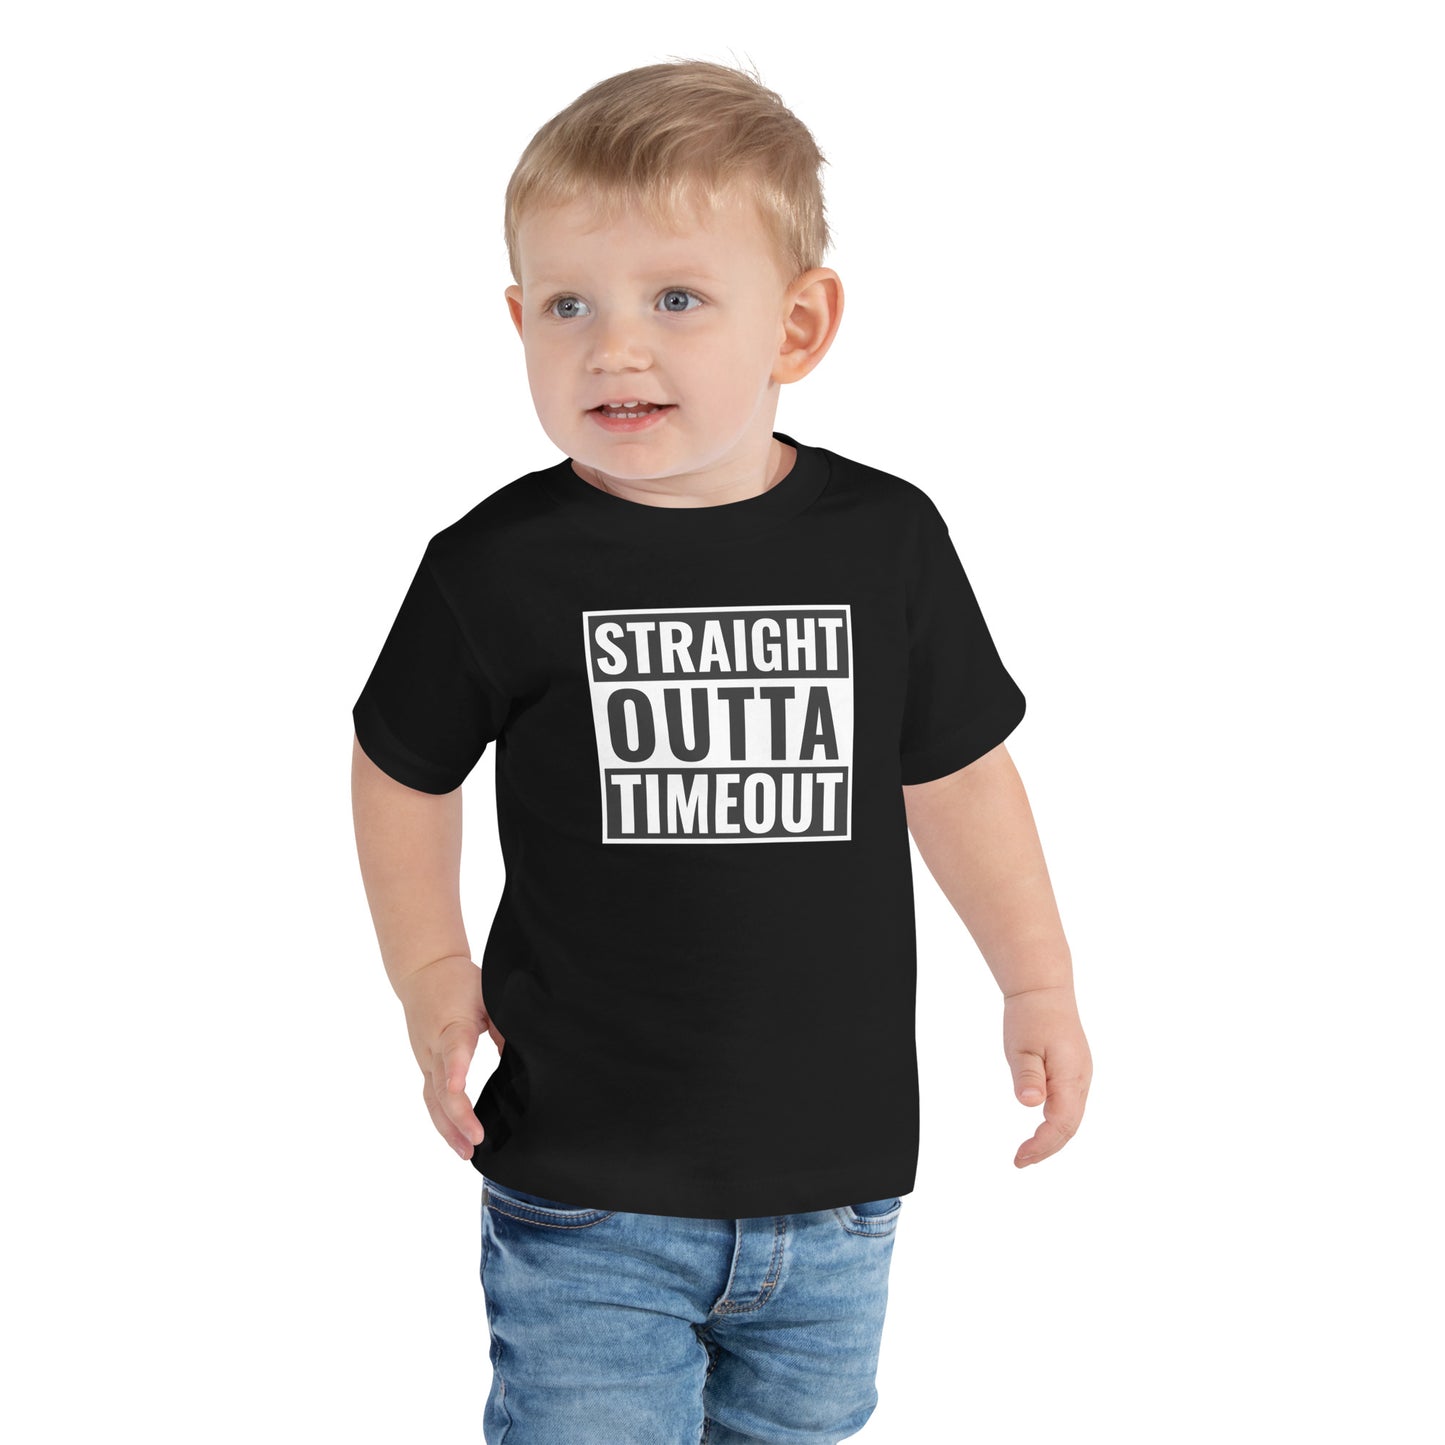 STRAIGHT OUTTA TIMEOUT Toddler Short Sleeve Tee